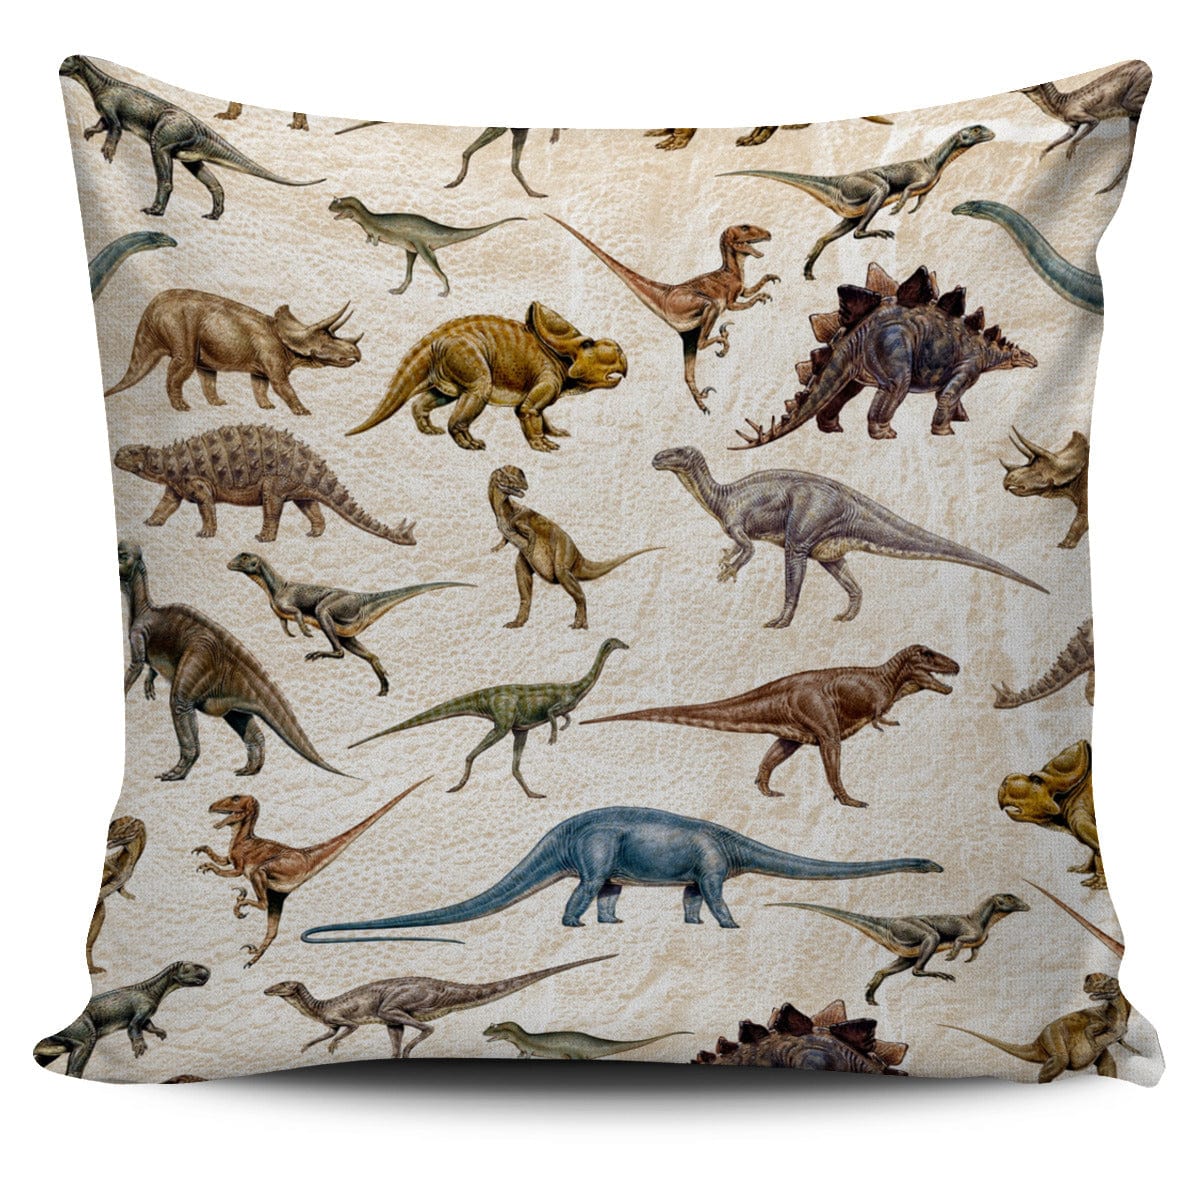 Pillow Cover - Dinosaurs and Tan Scale - GiddyGoatStore